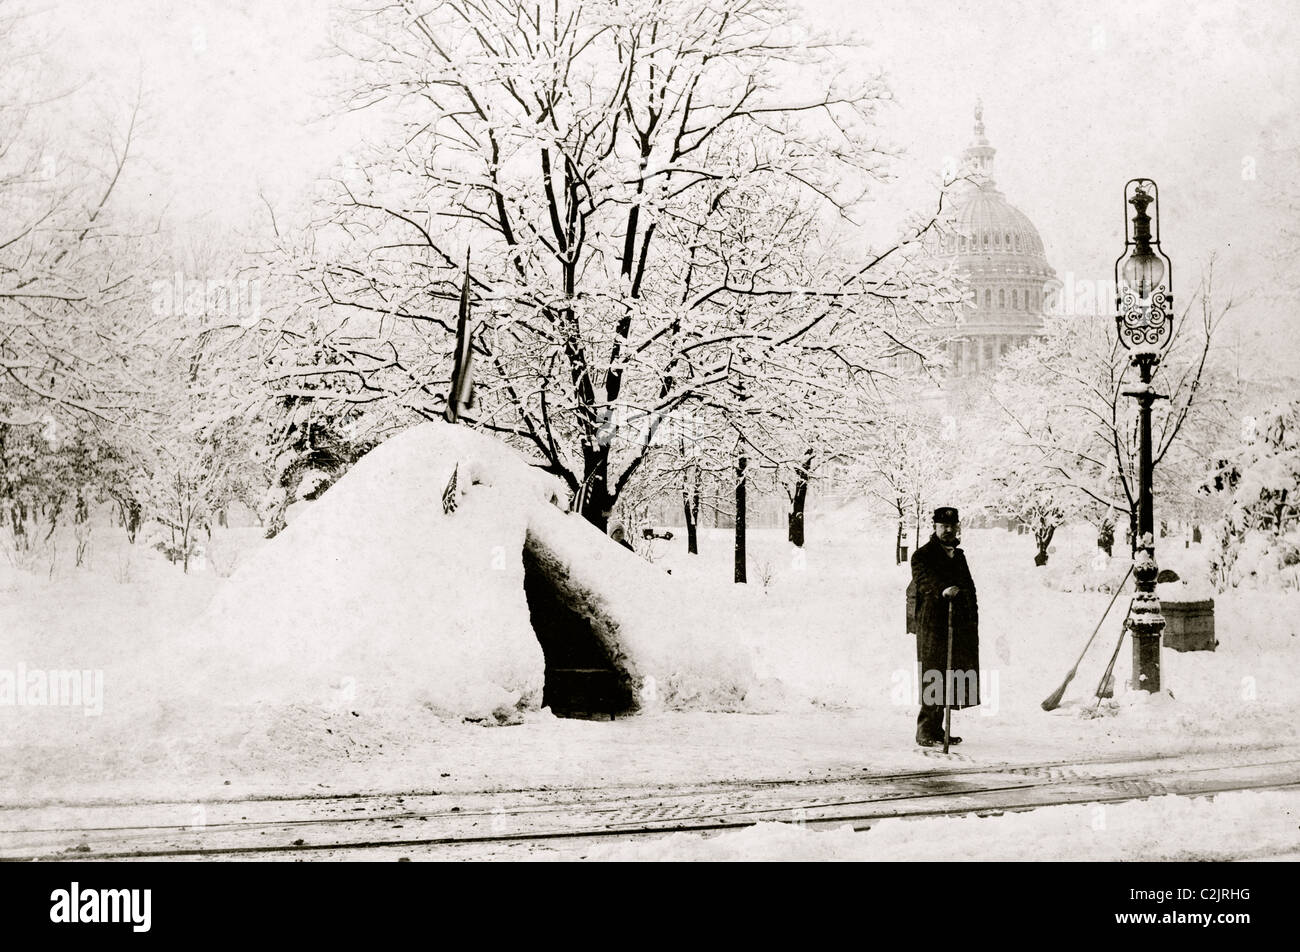 Man standing by snow hut, after blizzard of 1888, with U.S. Capitol in background, Washington, D.C. Stock Photo